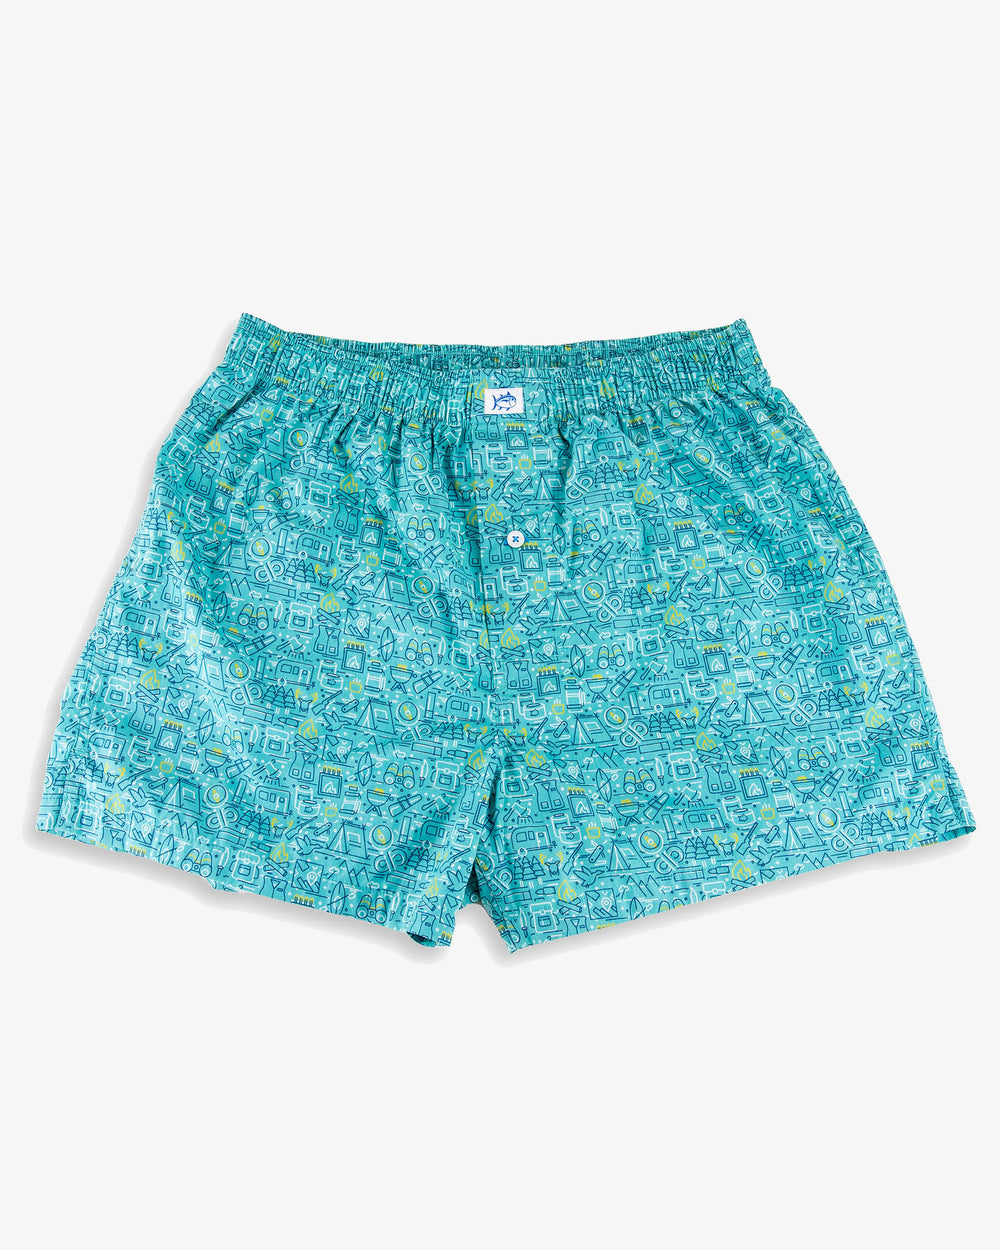 The front view of the Camping Is In-Tents Boxer by Southern Tide - Agate Green